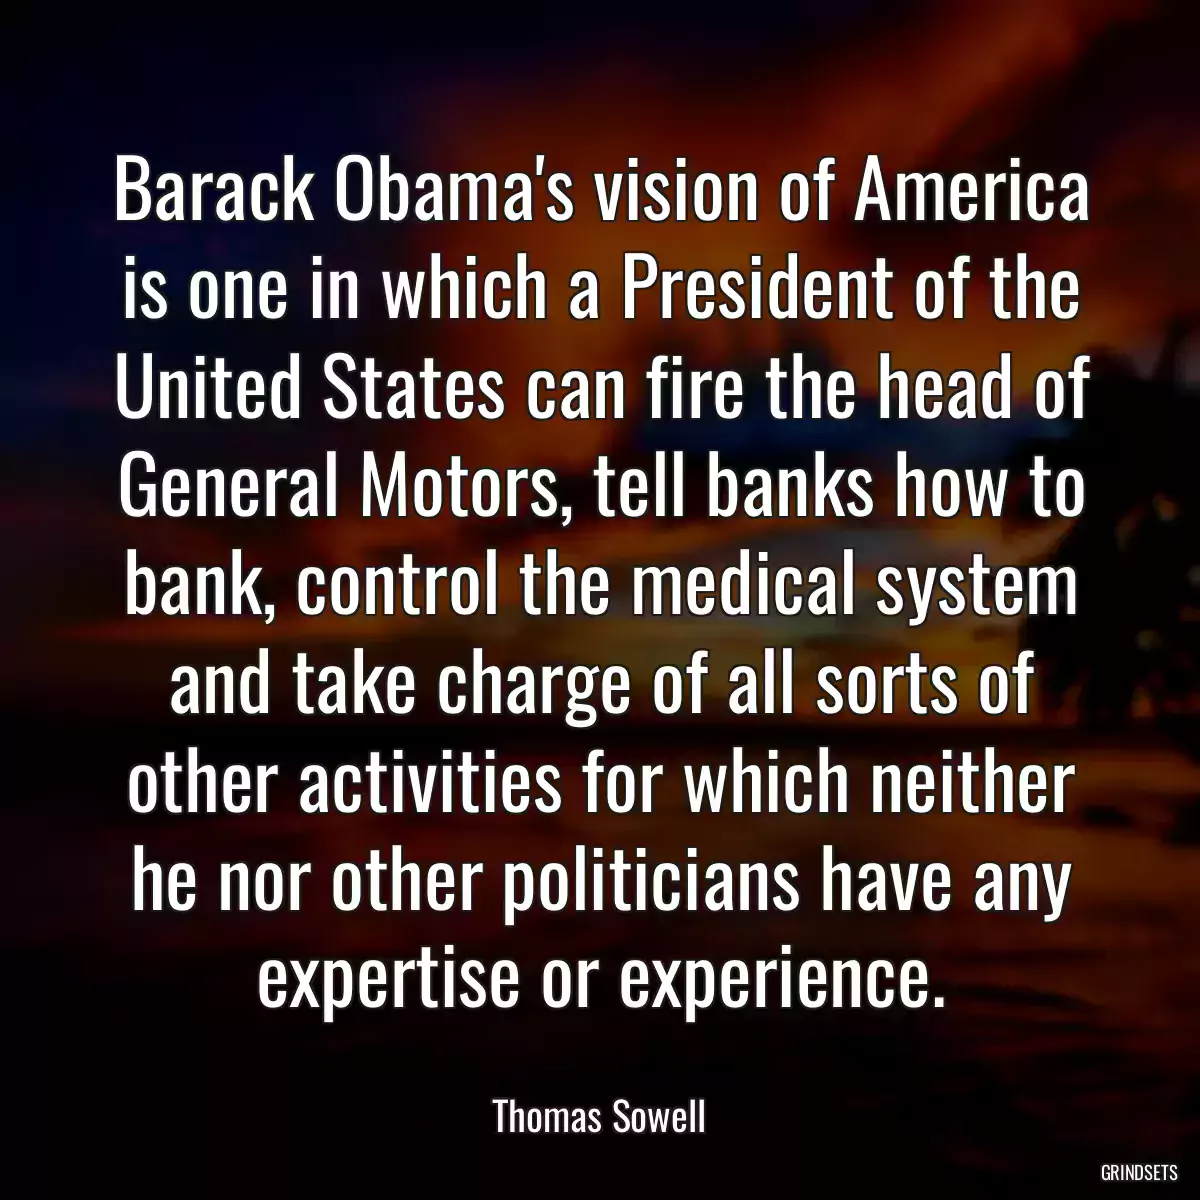 Barack Obama\'s vision of America is one in which a President of the United States can fire the head of General Motors, tell banks how to bank, control the medical system and take charge of all sorts of other activities for which neither he nor other politicians have any expertise or experience.